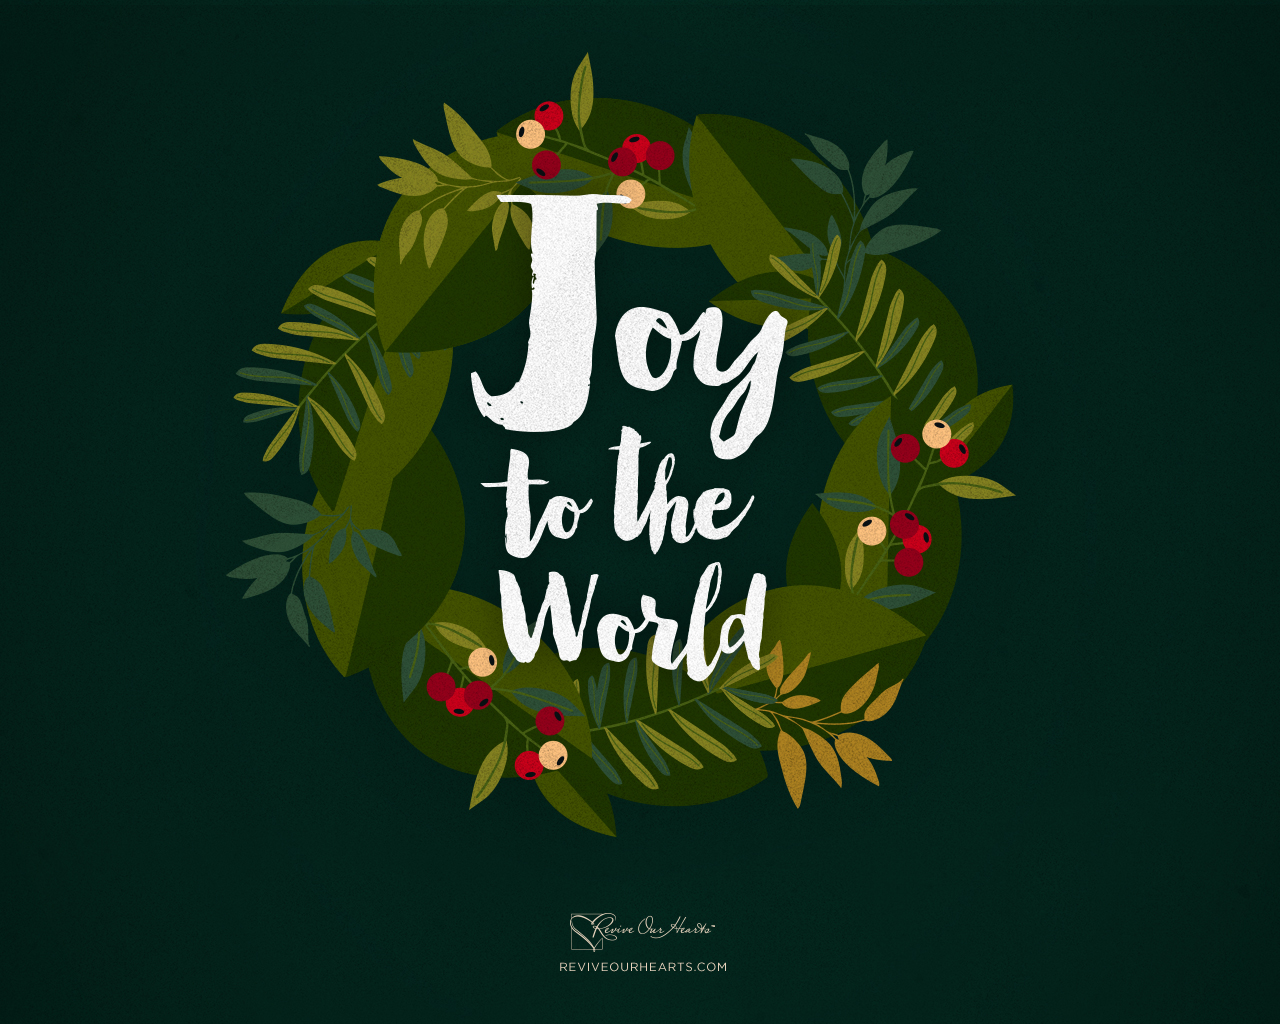 Joy To The World Wallpaper Revive Our Hearts